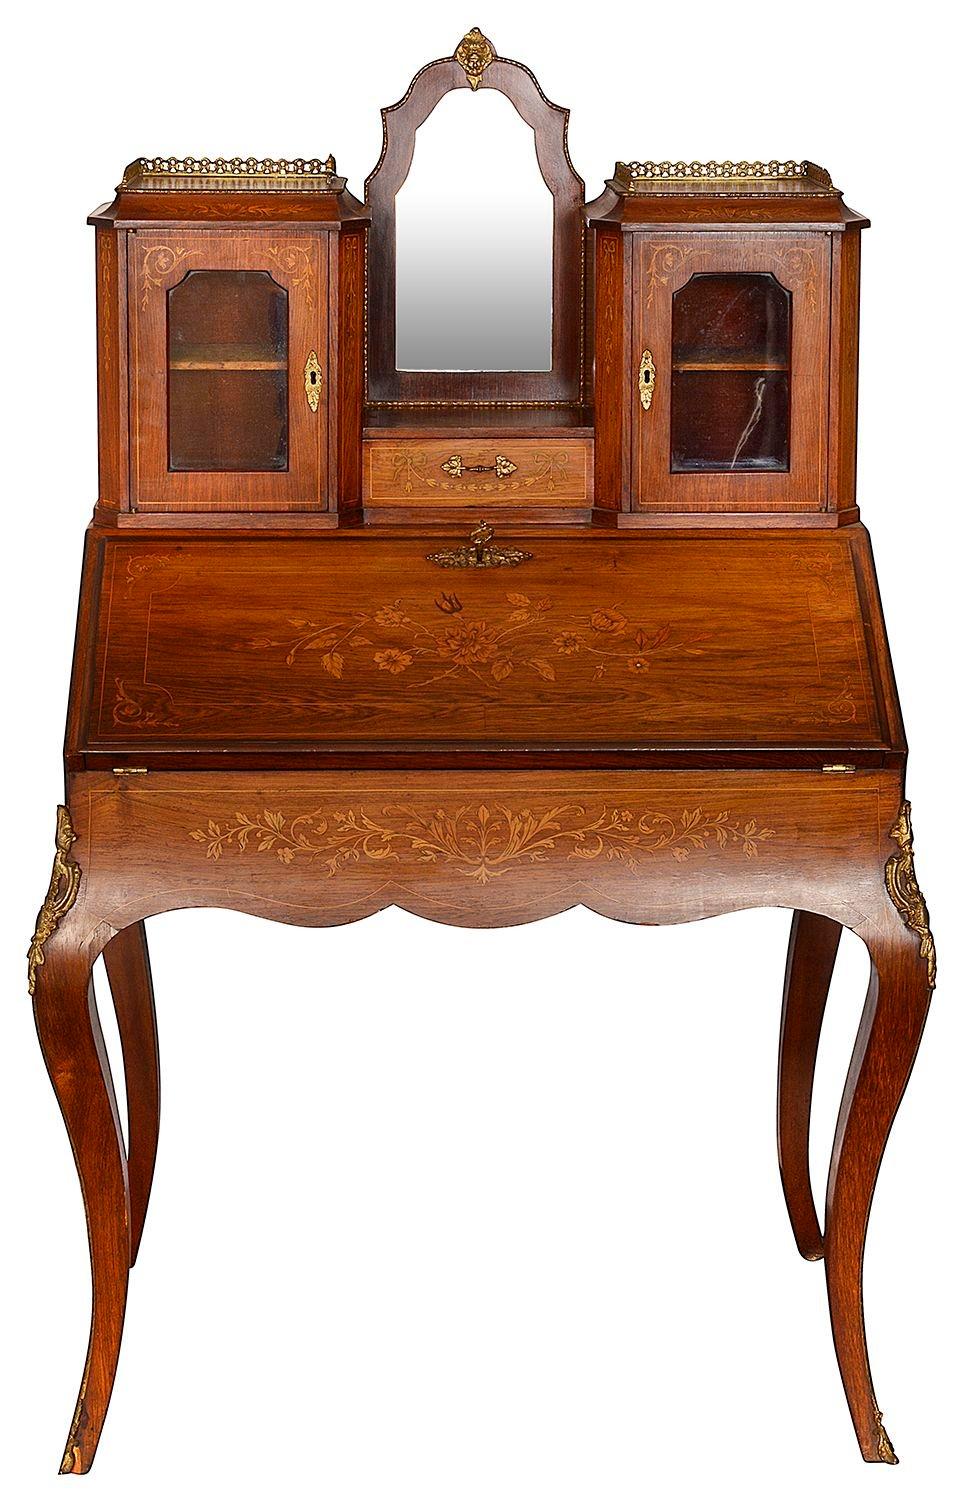 A good quality late 19th Century French Rosewood inlaid Bonheur Du Jour, having glazed cupboards and mirror above. A fall front bureau opening to reveal compartments within, drawers and an inset leather writing tablet. Raised on elegant cabriole